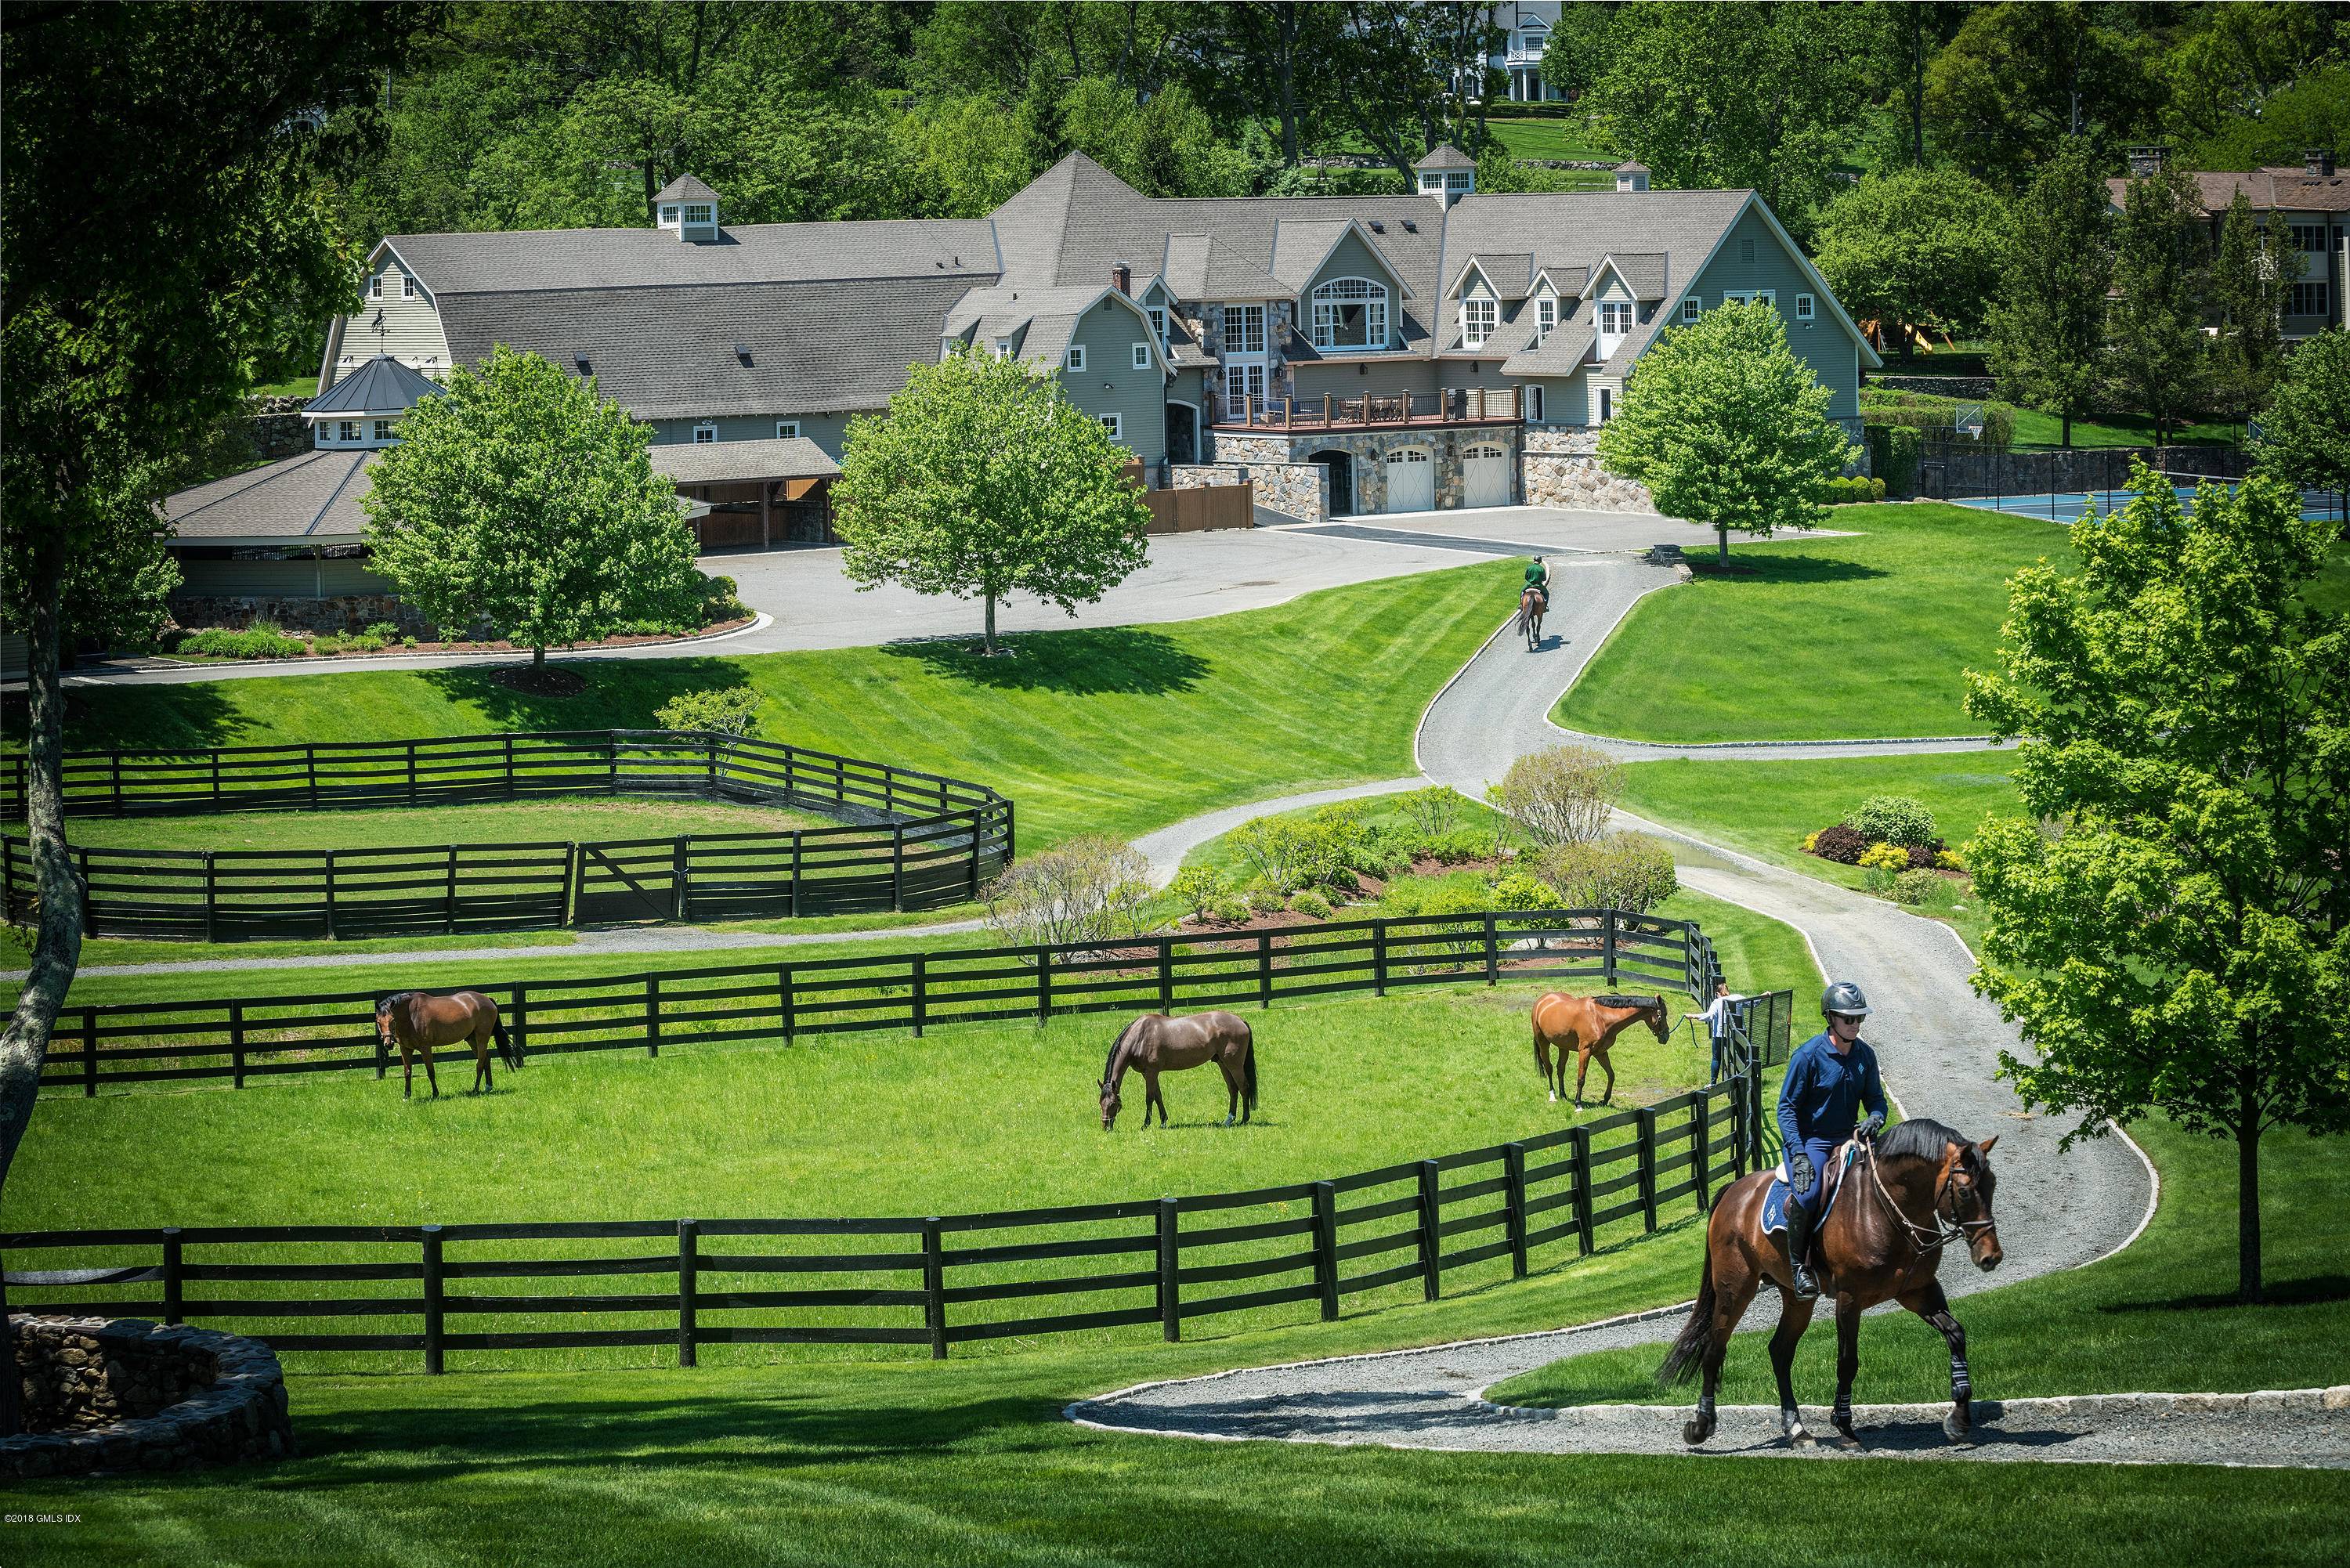 Double H Farm is a one of a kind premier equestrian facility, built on 47 acres with a main house, a superbly restored C.